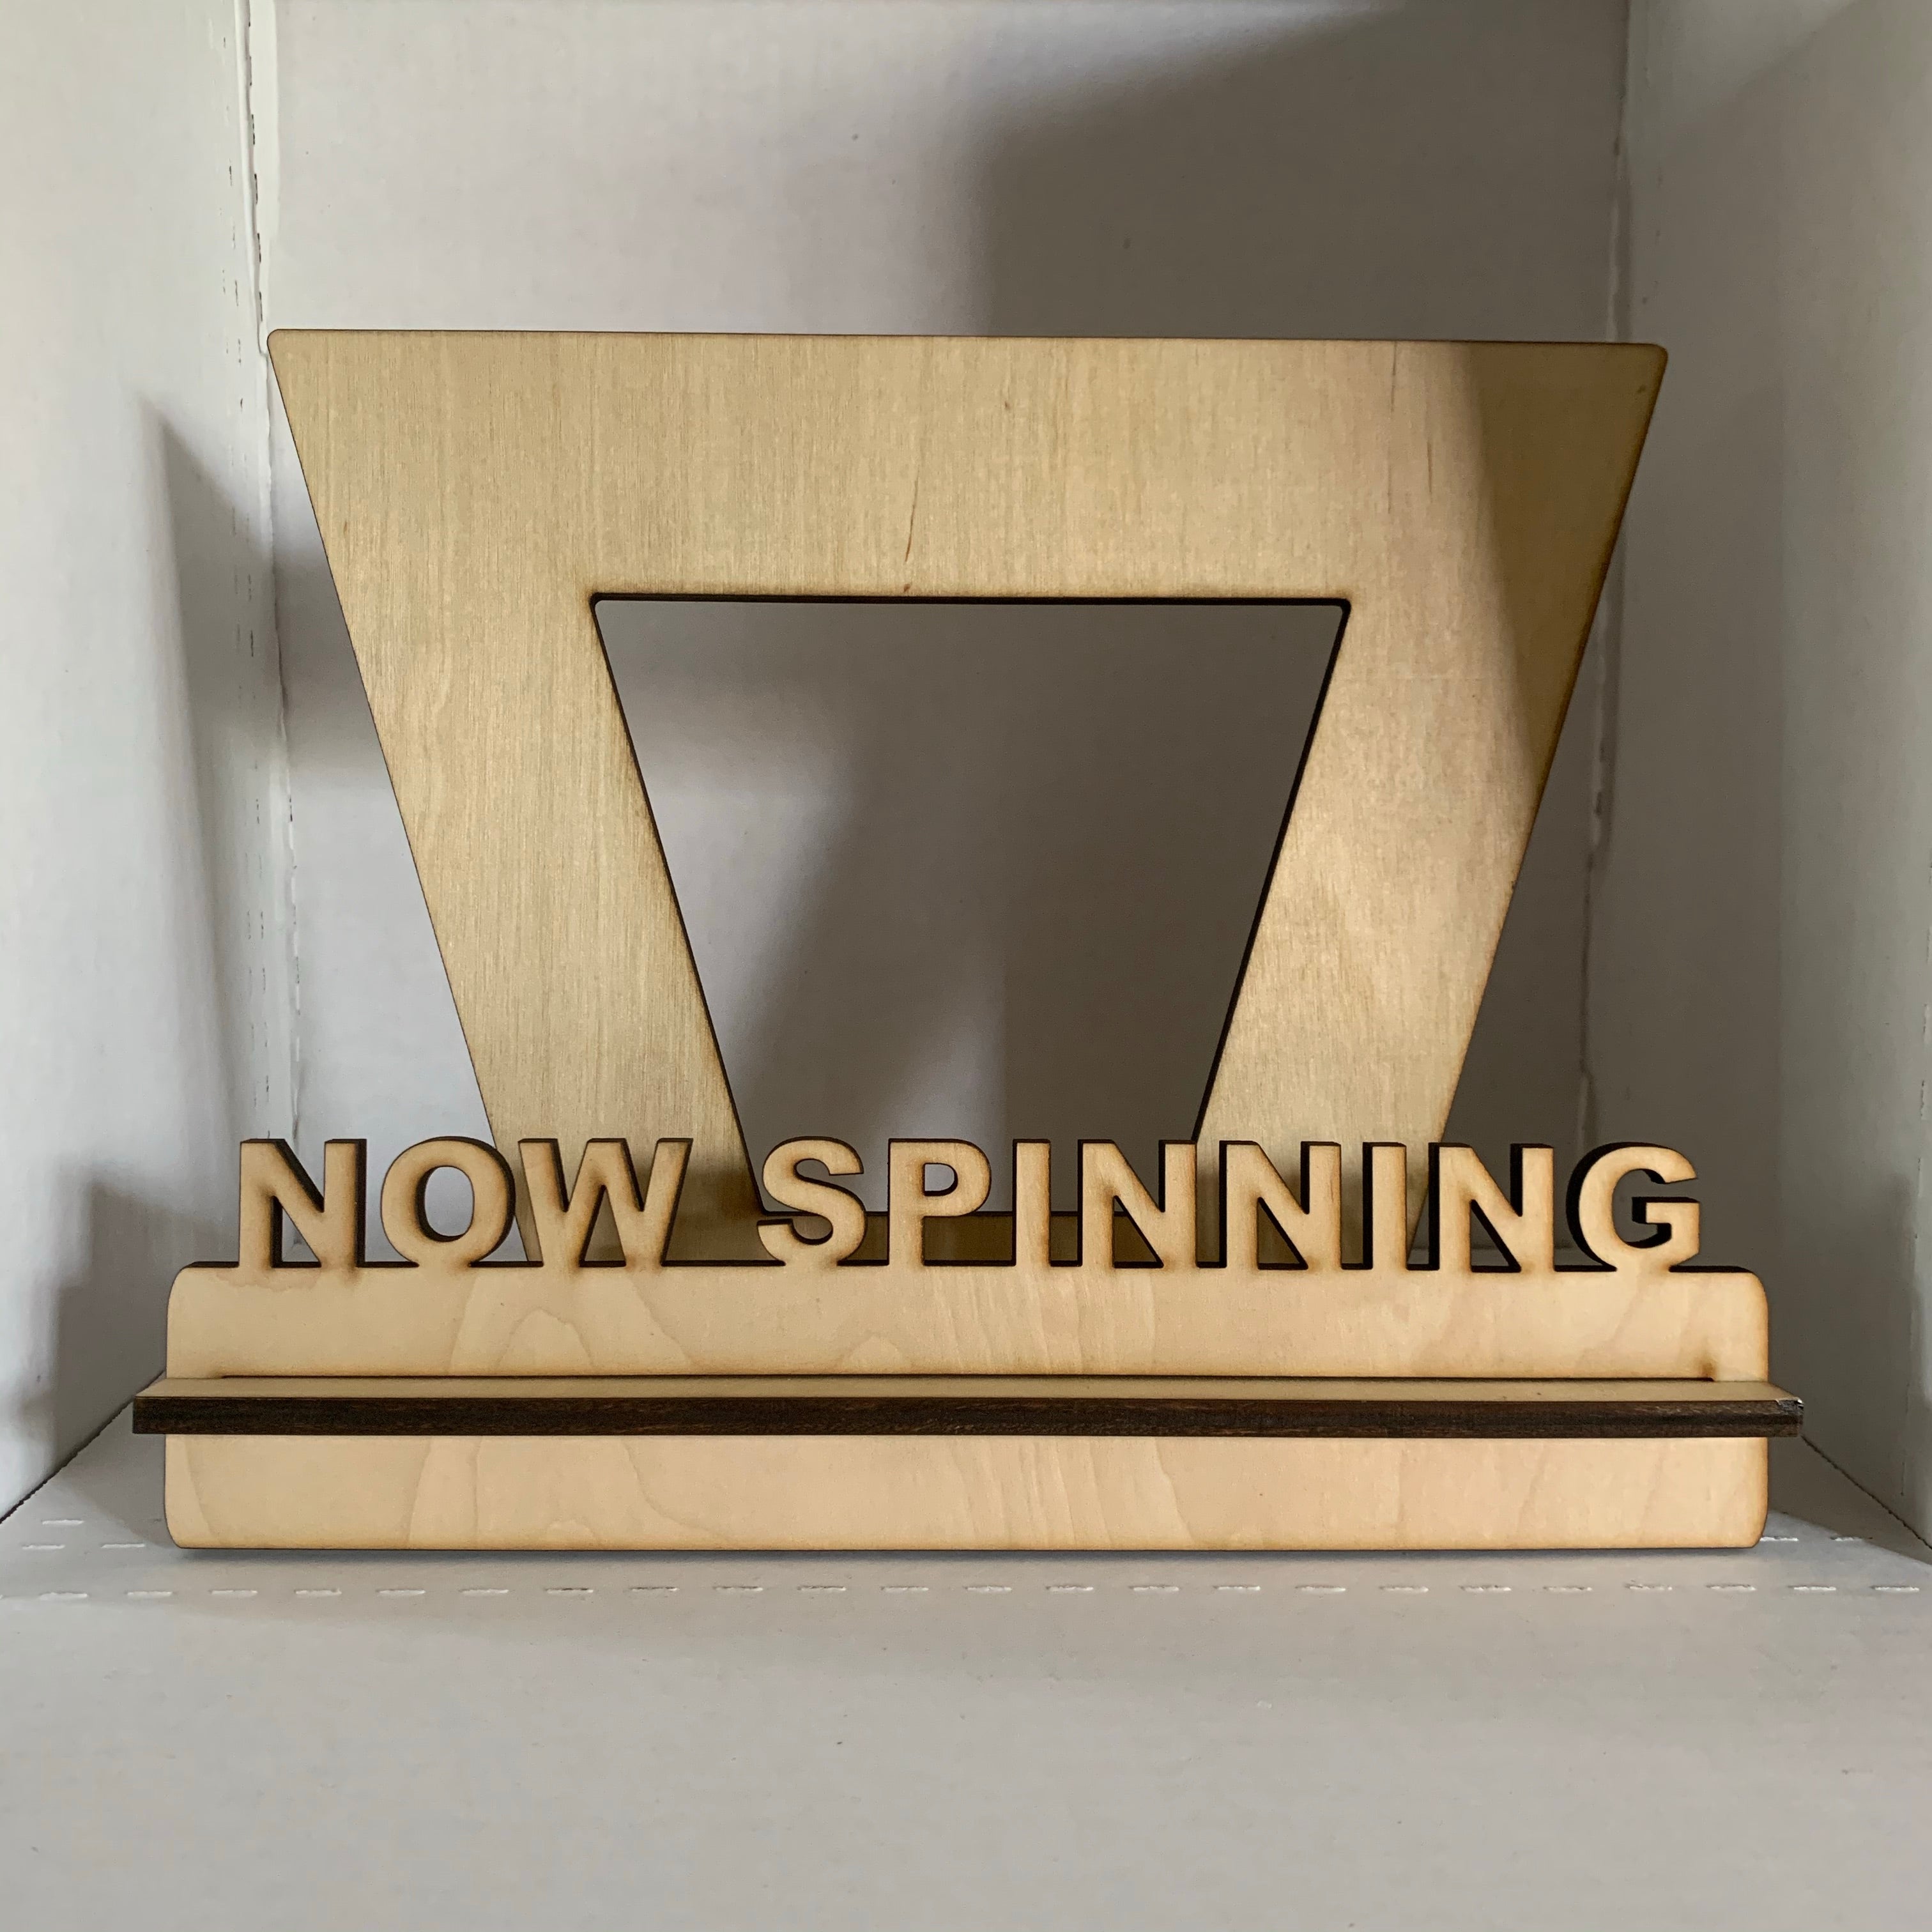 Now Playing' vinyl record stand by toddanglin, Download free STL model